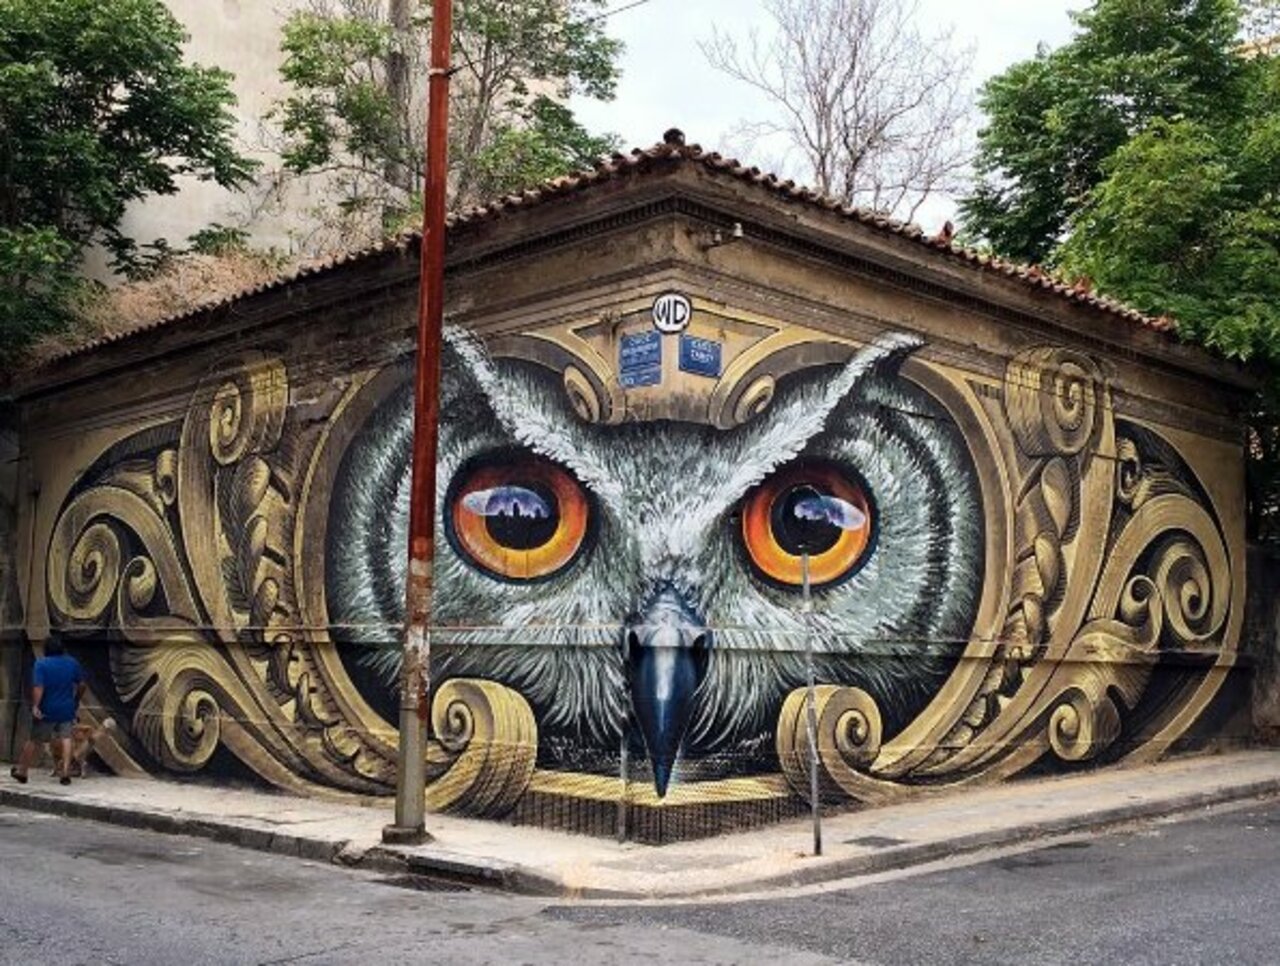 Wow! WD's latest work in AthensFollow him at http://bit.ly/1IEy91R#Greece #StreetArt https://t.co/prfUu4B2Yw